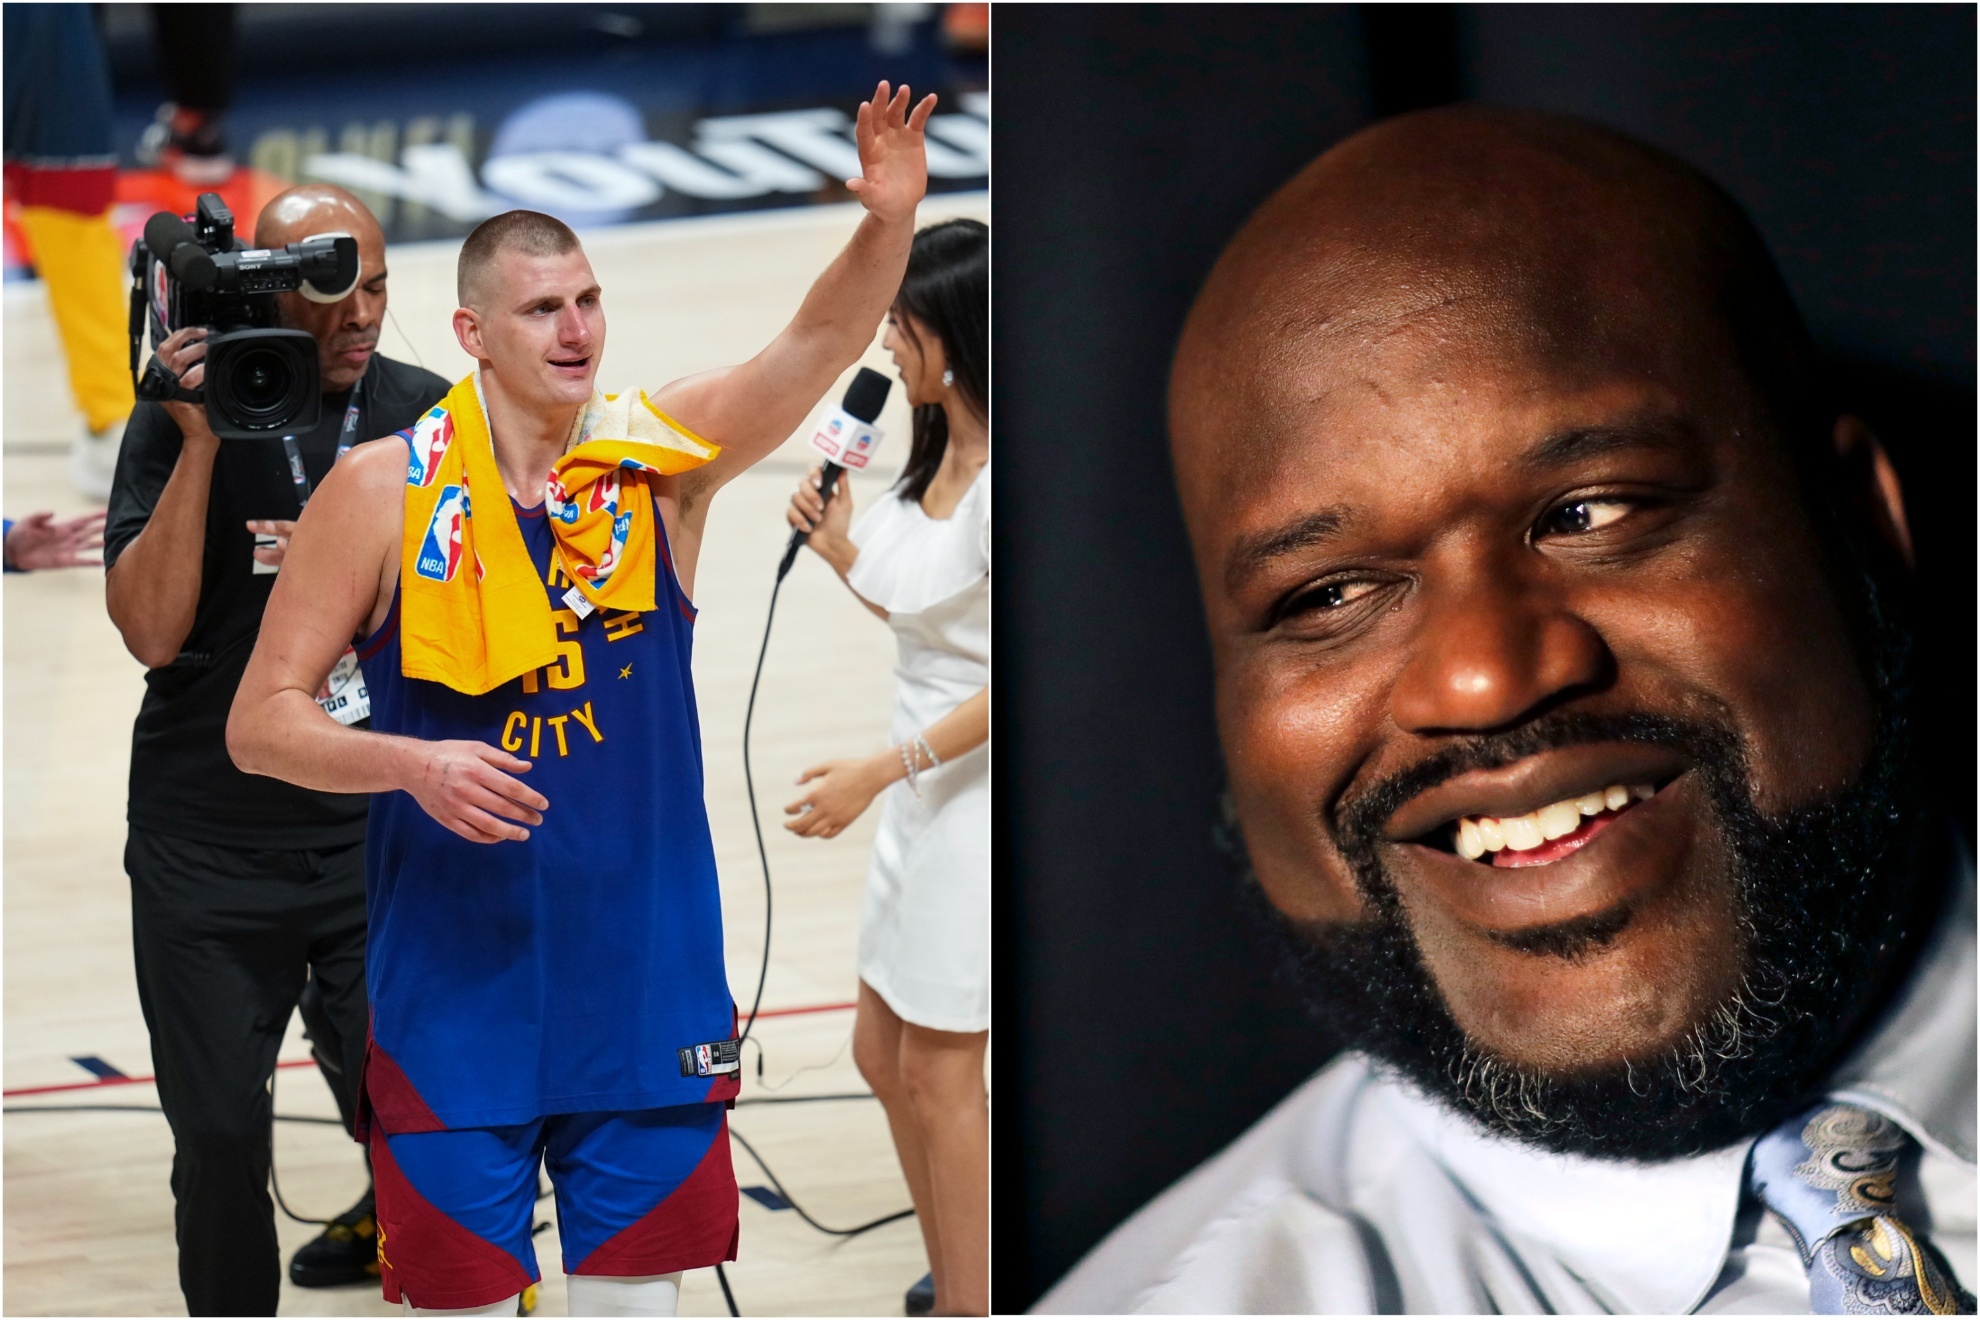 Shaquille O'Neal on Nikola Jokic after Game 1 of the NBA Finals: "He's going to make the right play every time"